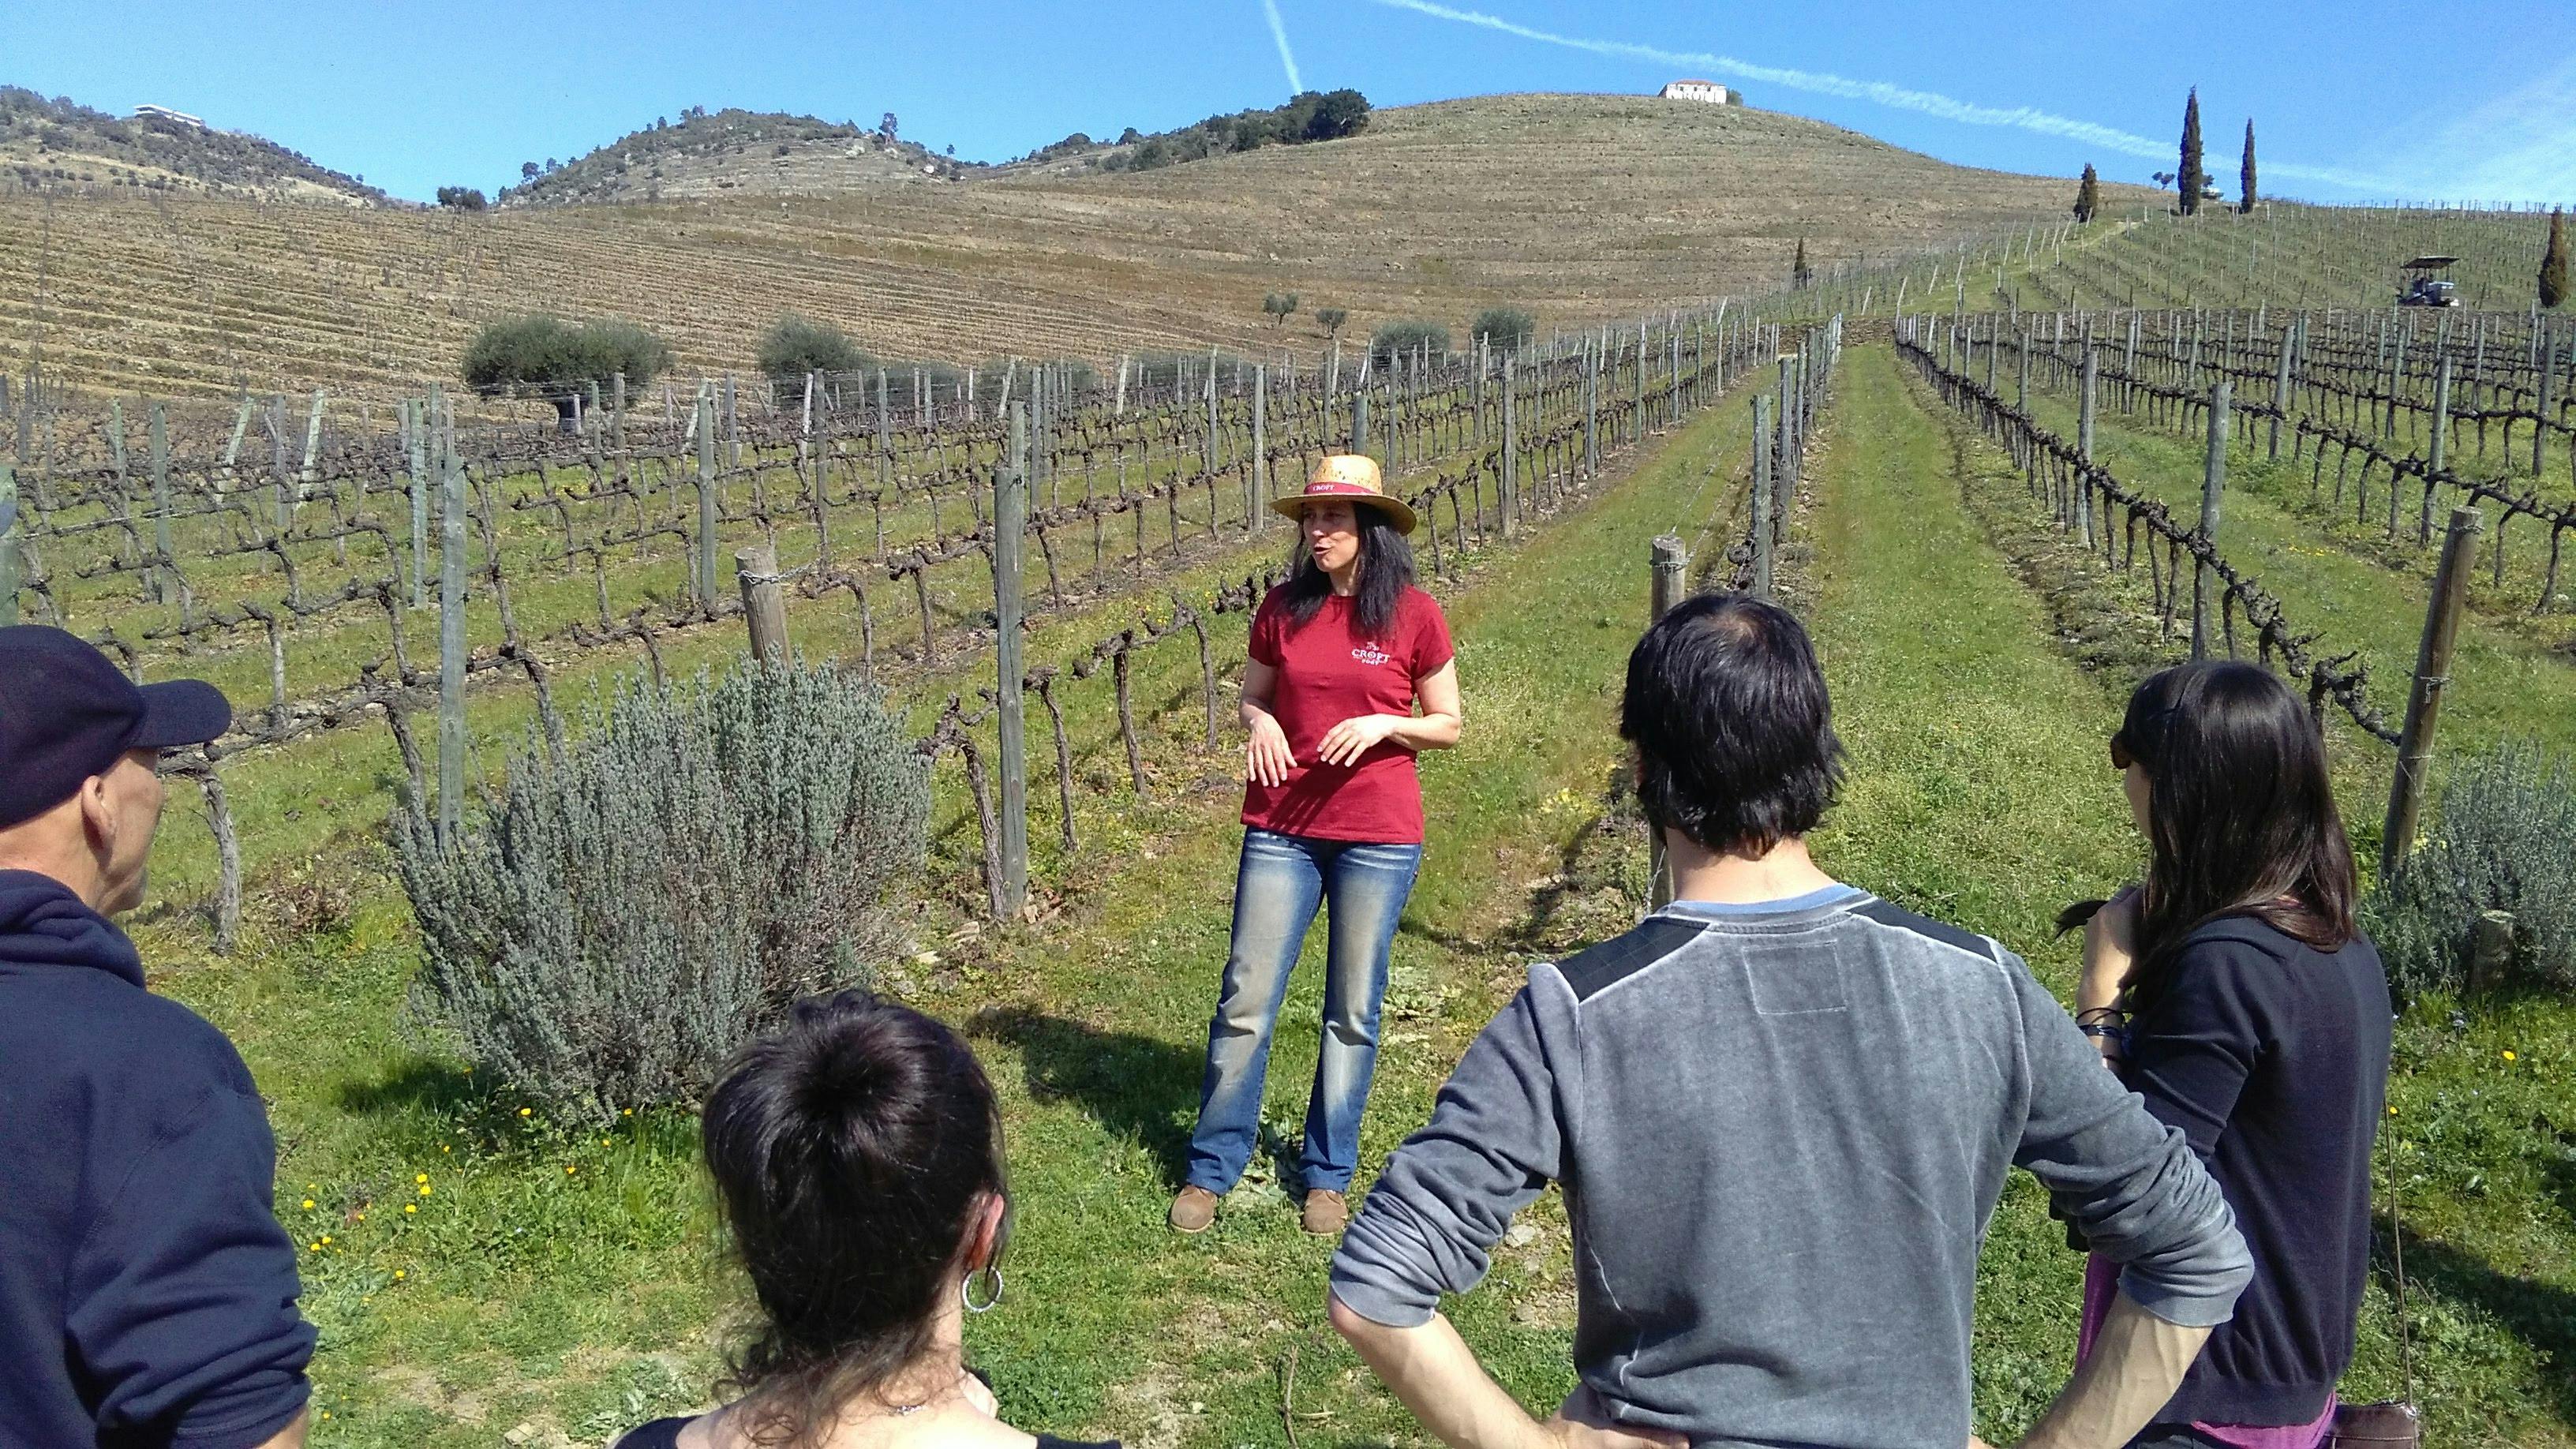 Douro Valley Wine Tour: Visit to 3 vineyards with lunch